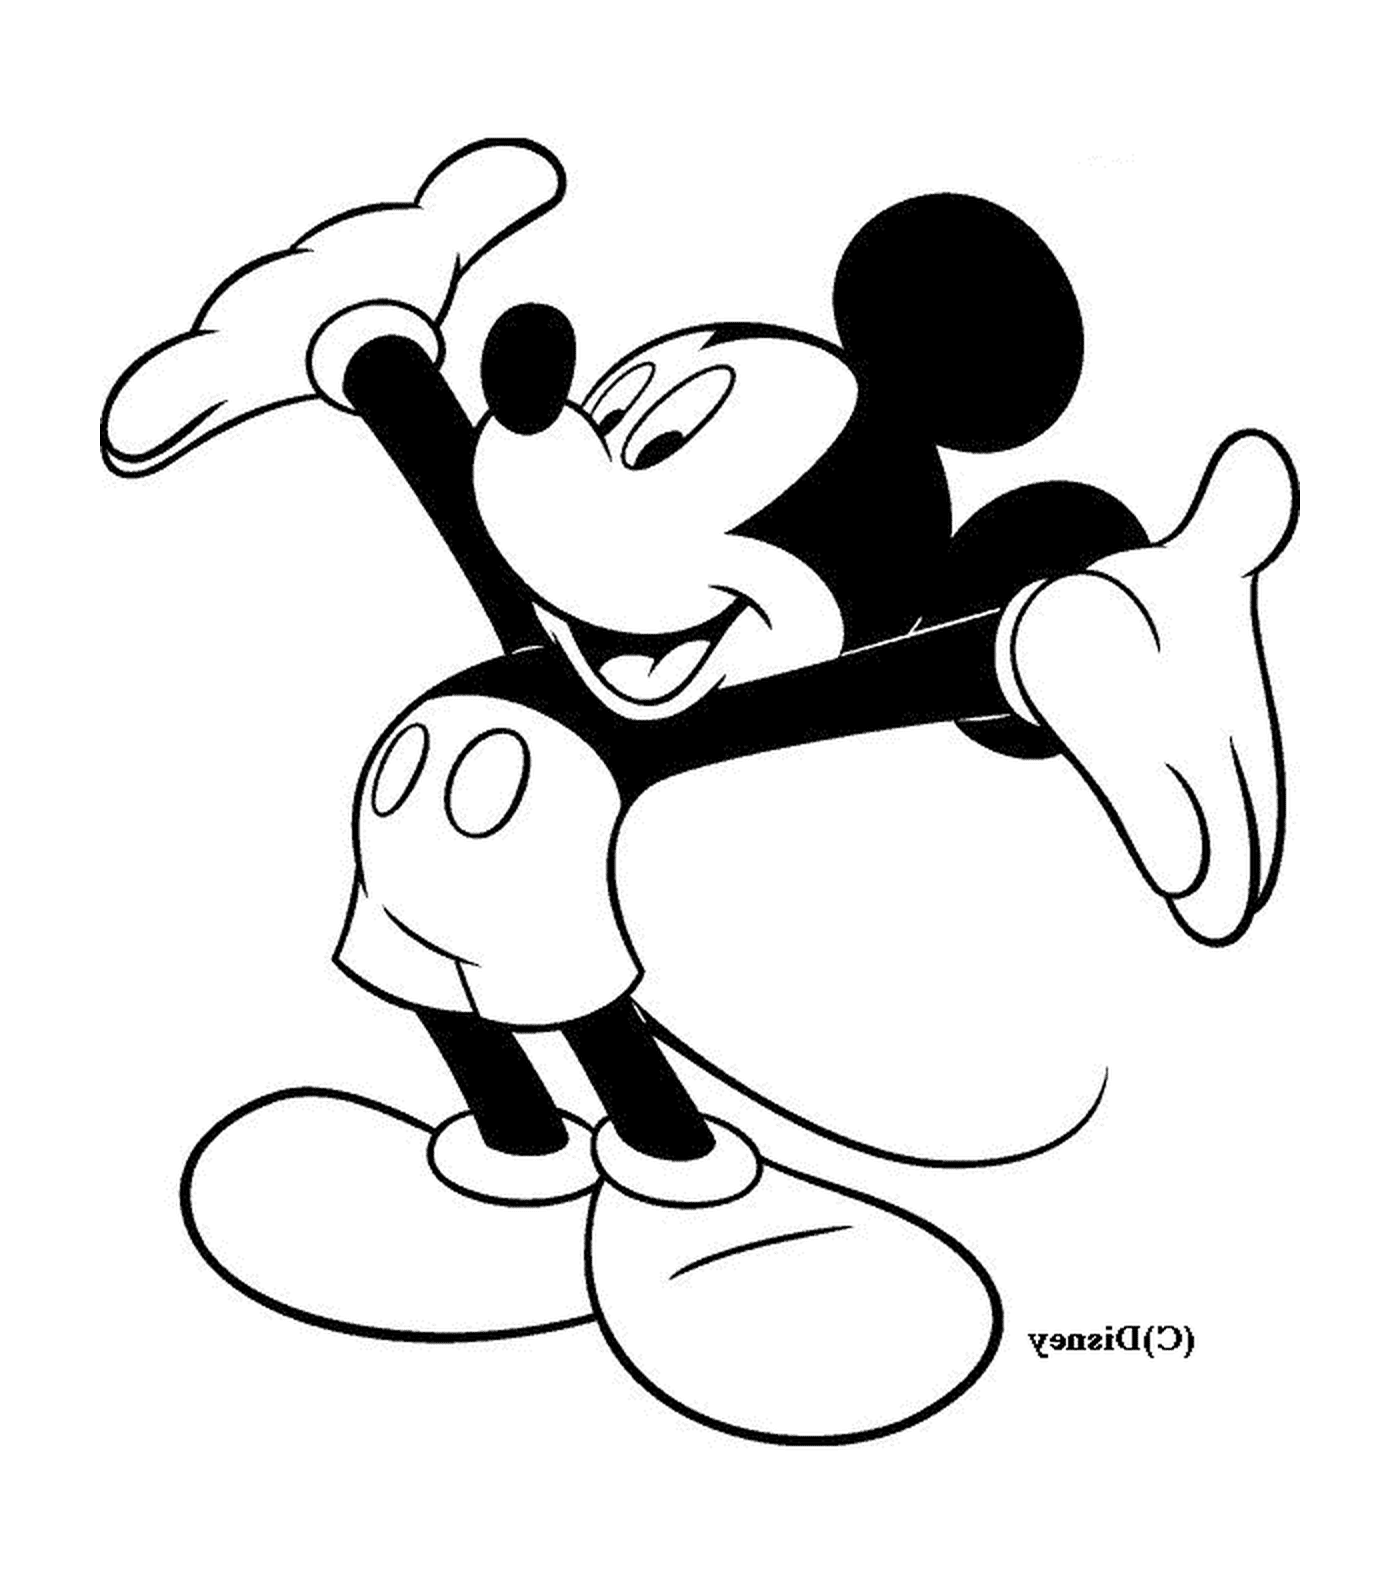   Mickey les bras ouverts : Mickey Mouse 